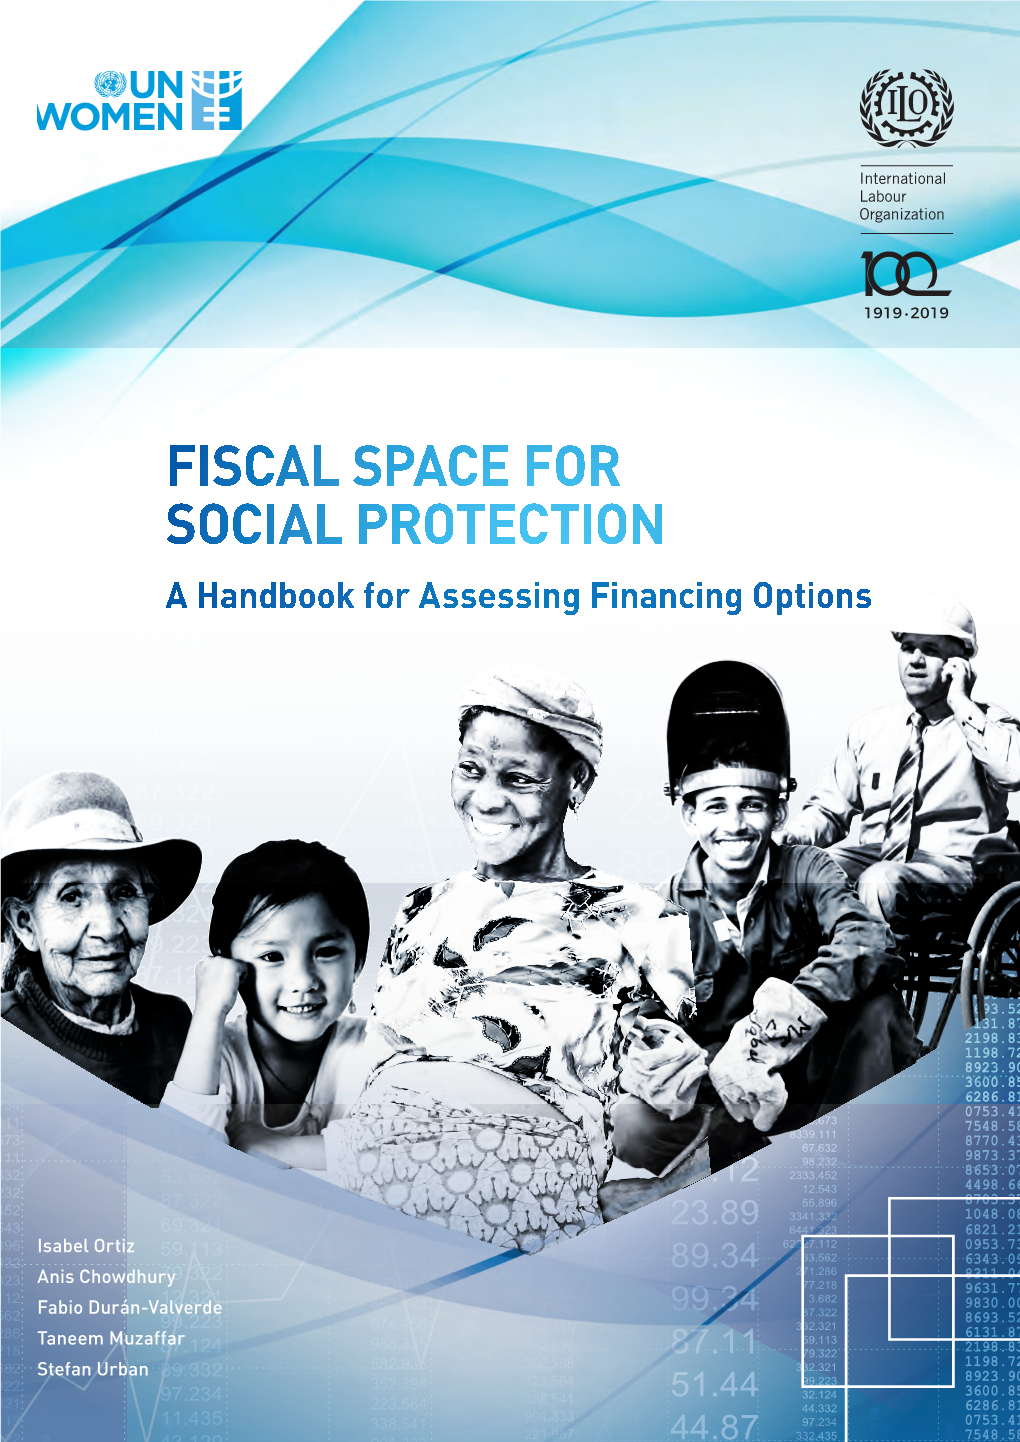 FISCAL SPACE for SOCIAL PROTECTION: a Handbook for Assessing Financing Options